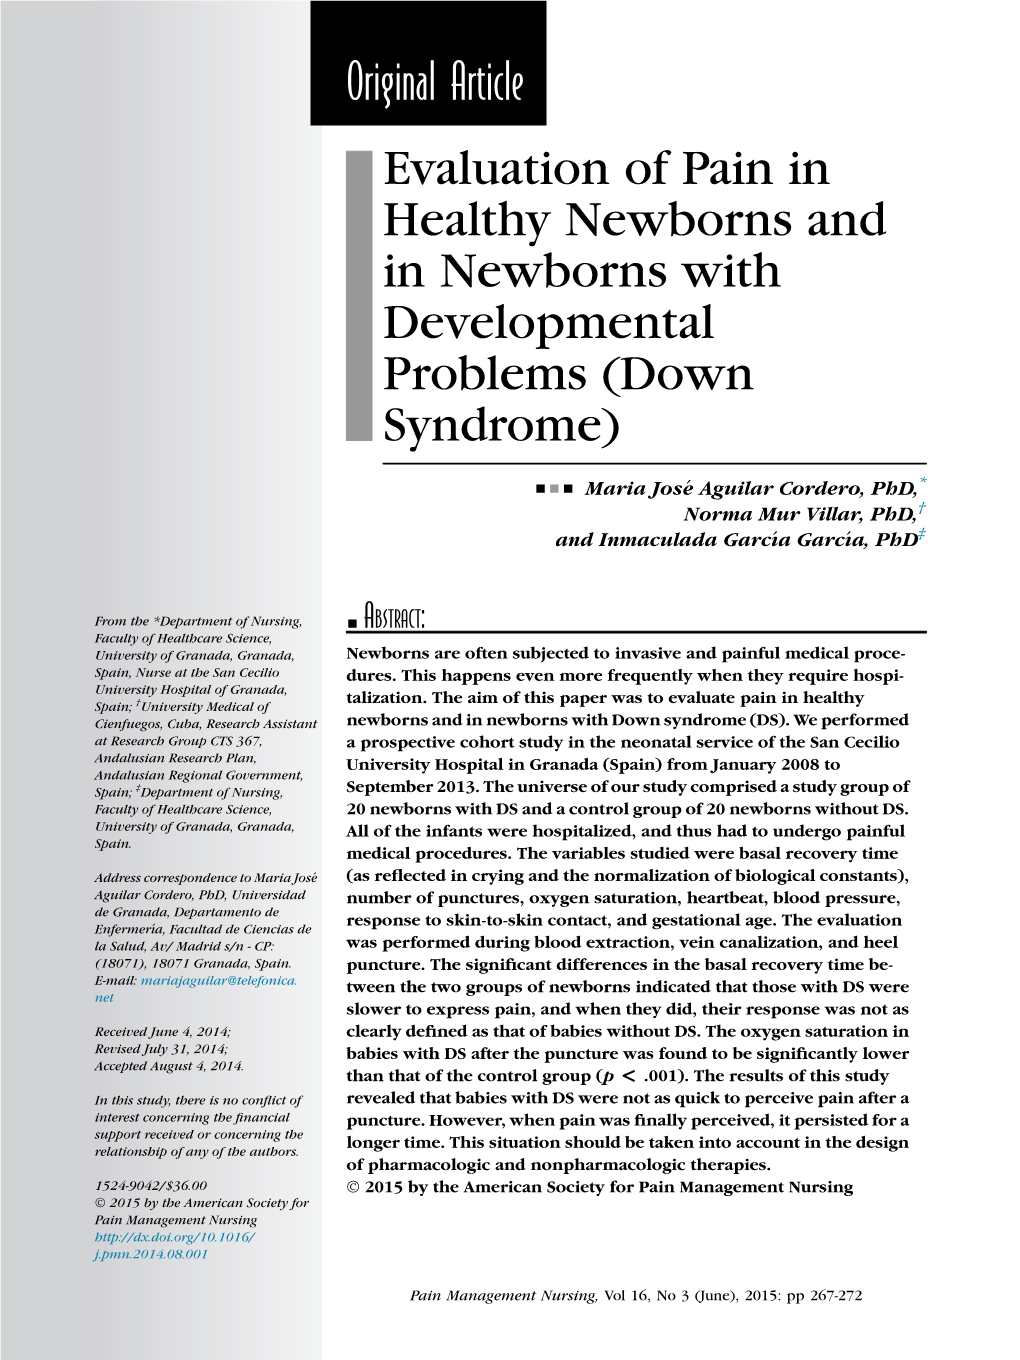 Evaluation of Pain in Healthy Newborns and in Newborns with Developmental Problems (Down Syndrome)